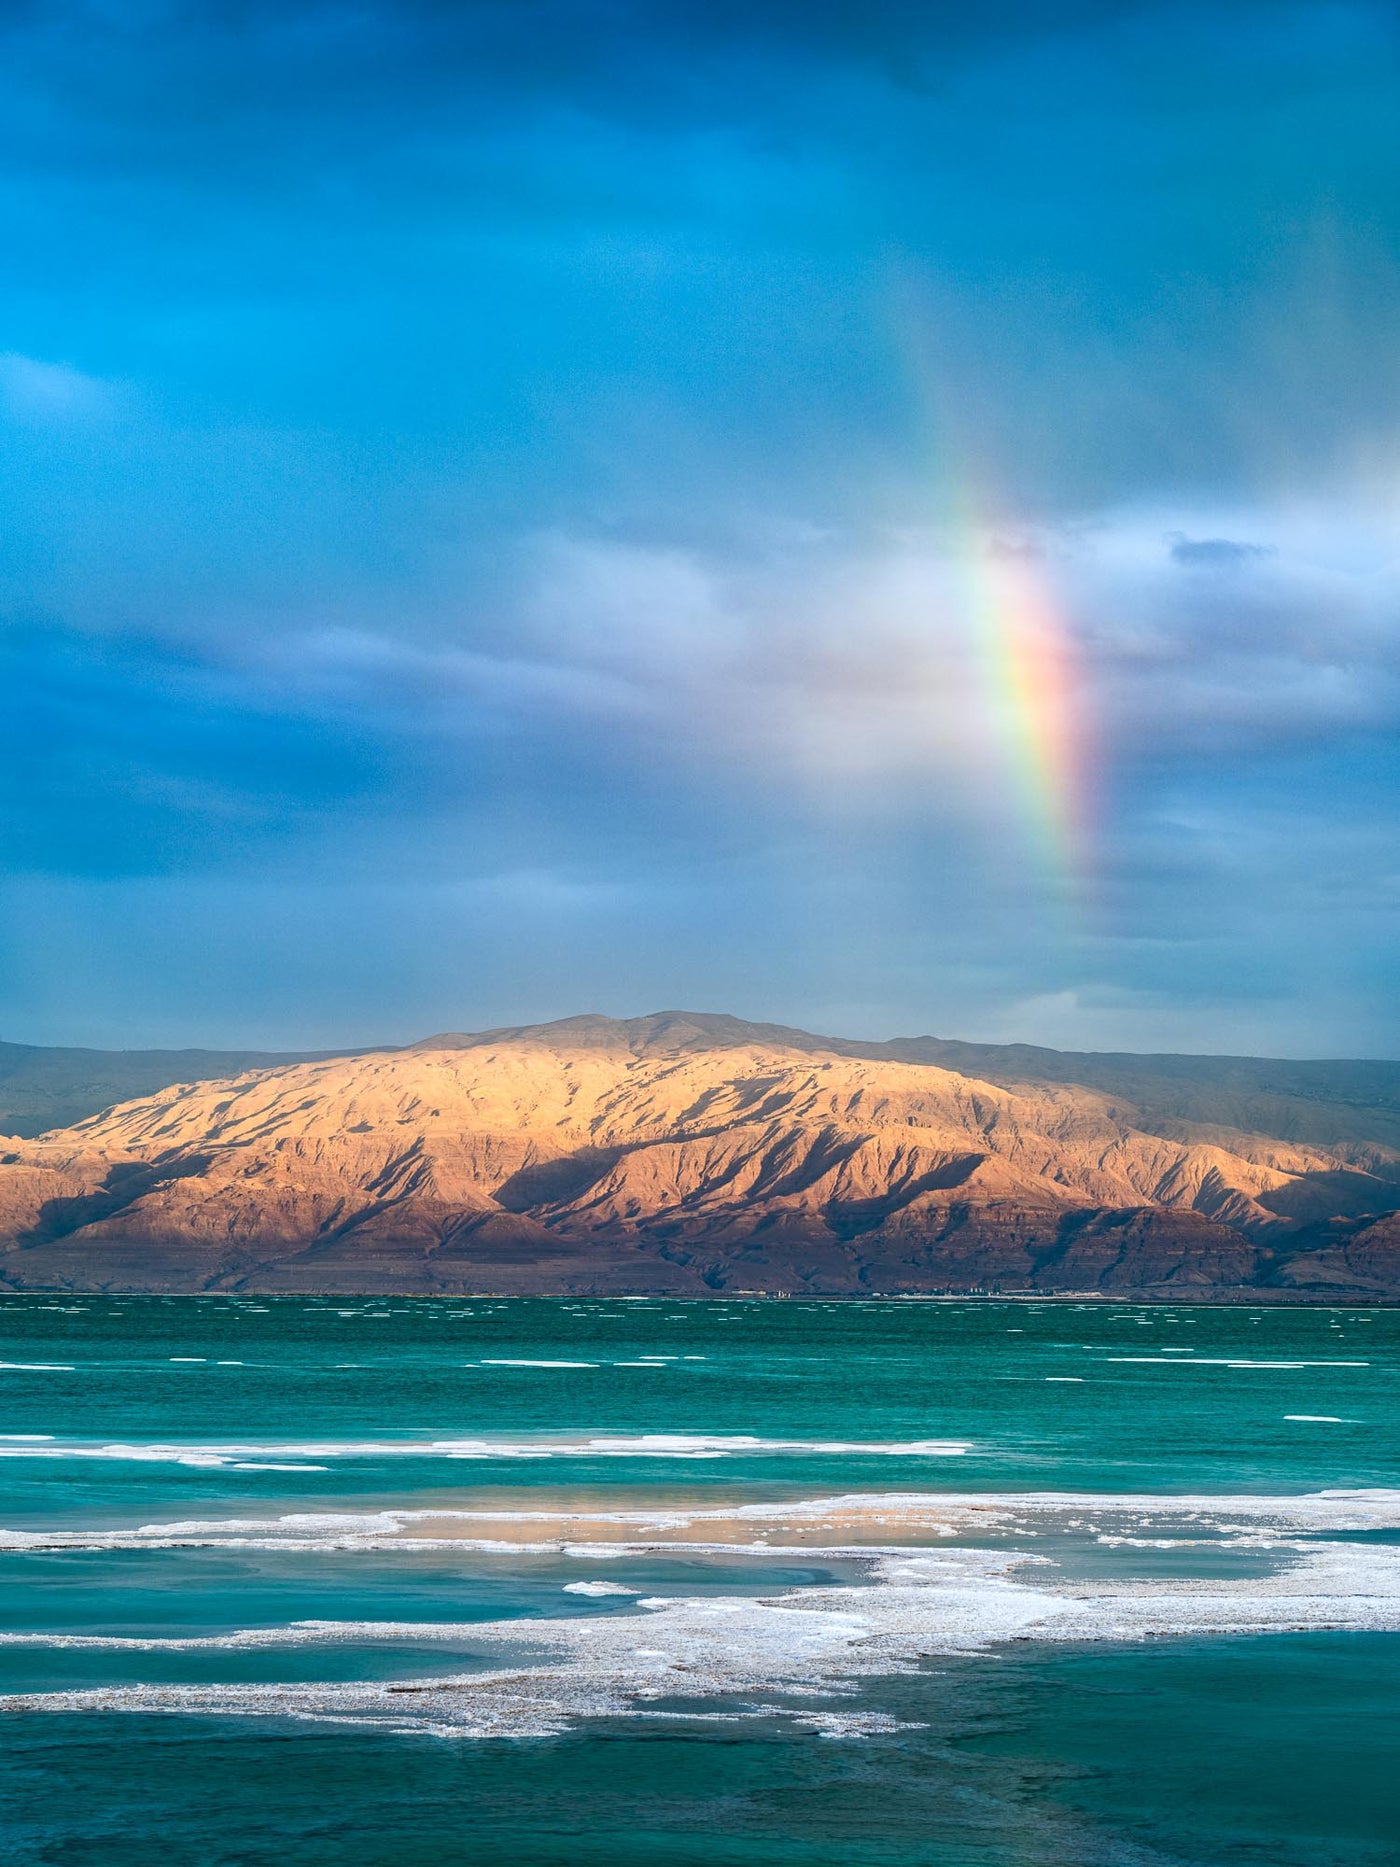 Covenant - By Yehoshua Aryeh - Photograph of Israel - Dead Sea